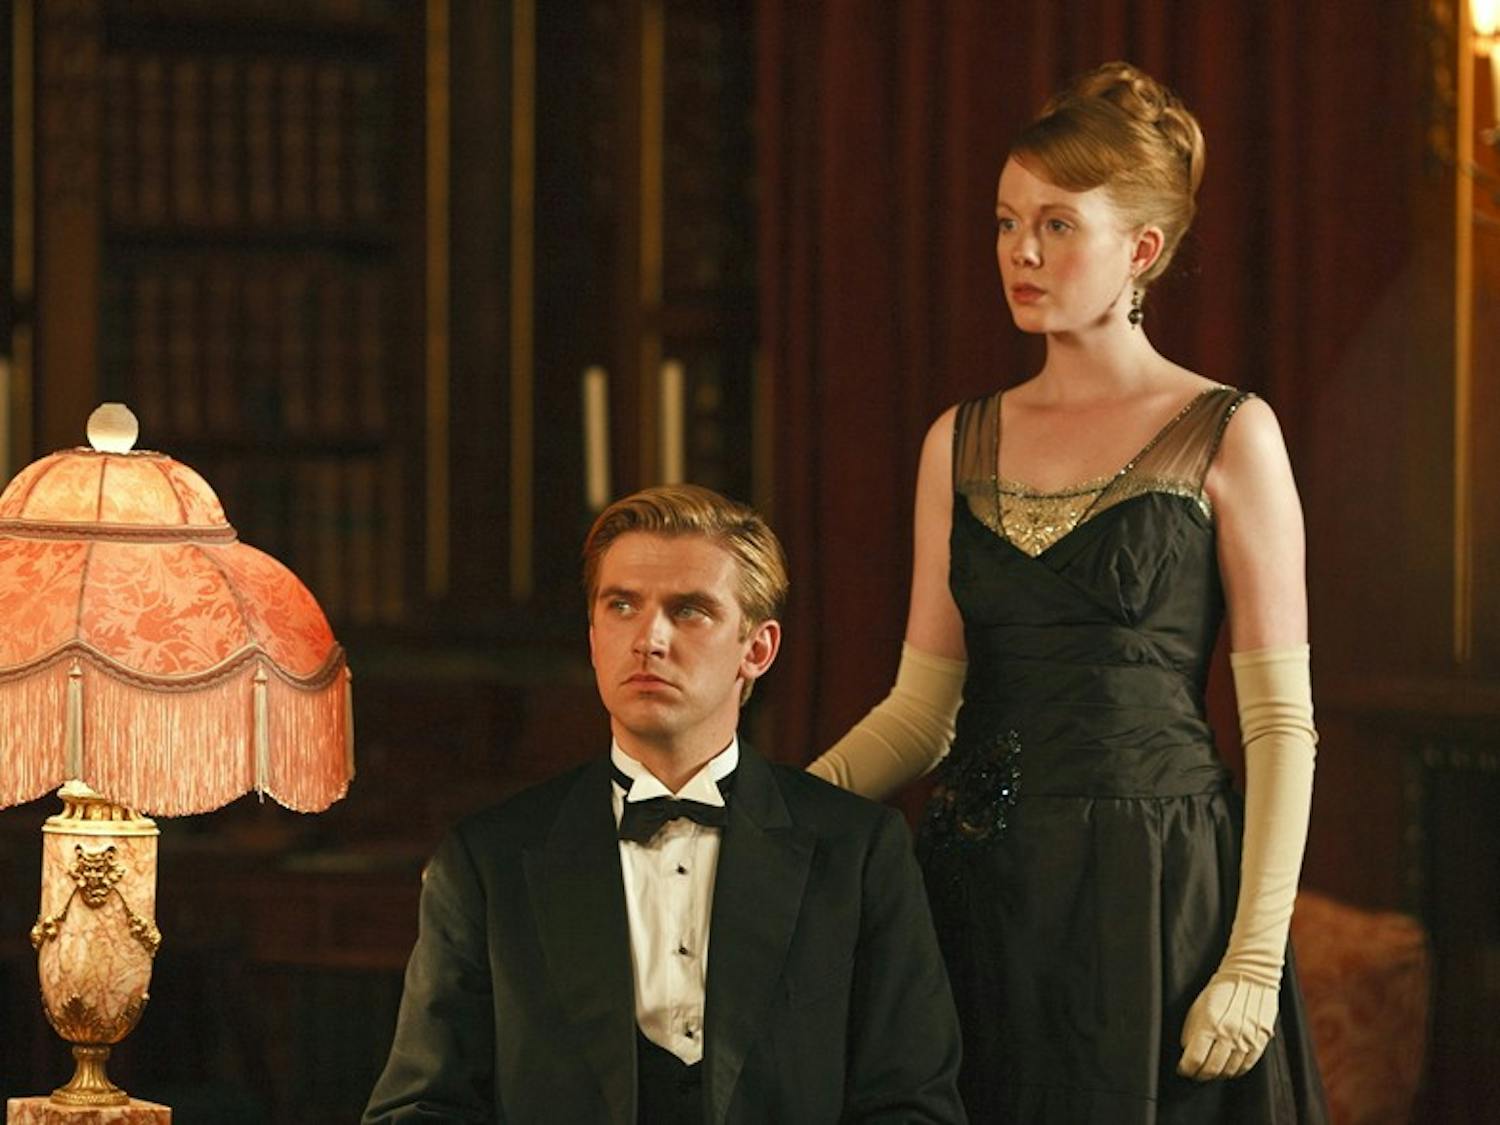 The feature-length adaptation of “Downton Abbey” follows a trend of revivals of hit TV shows.